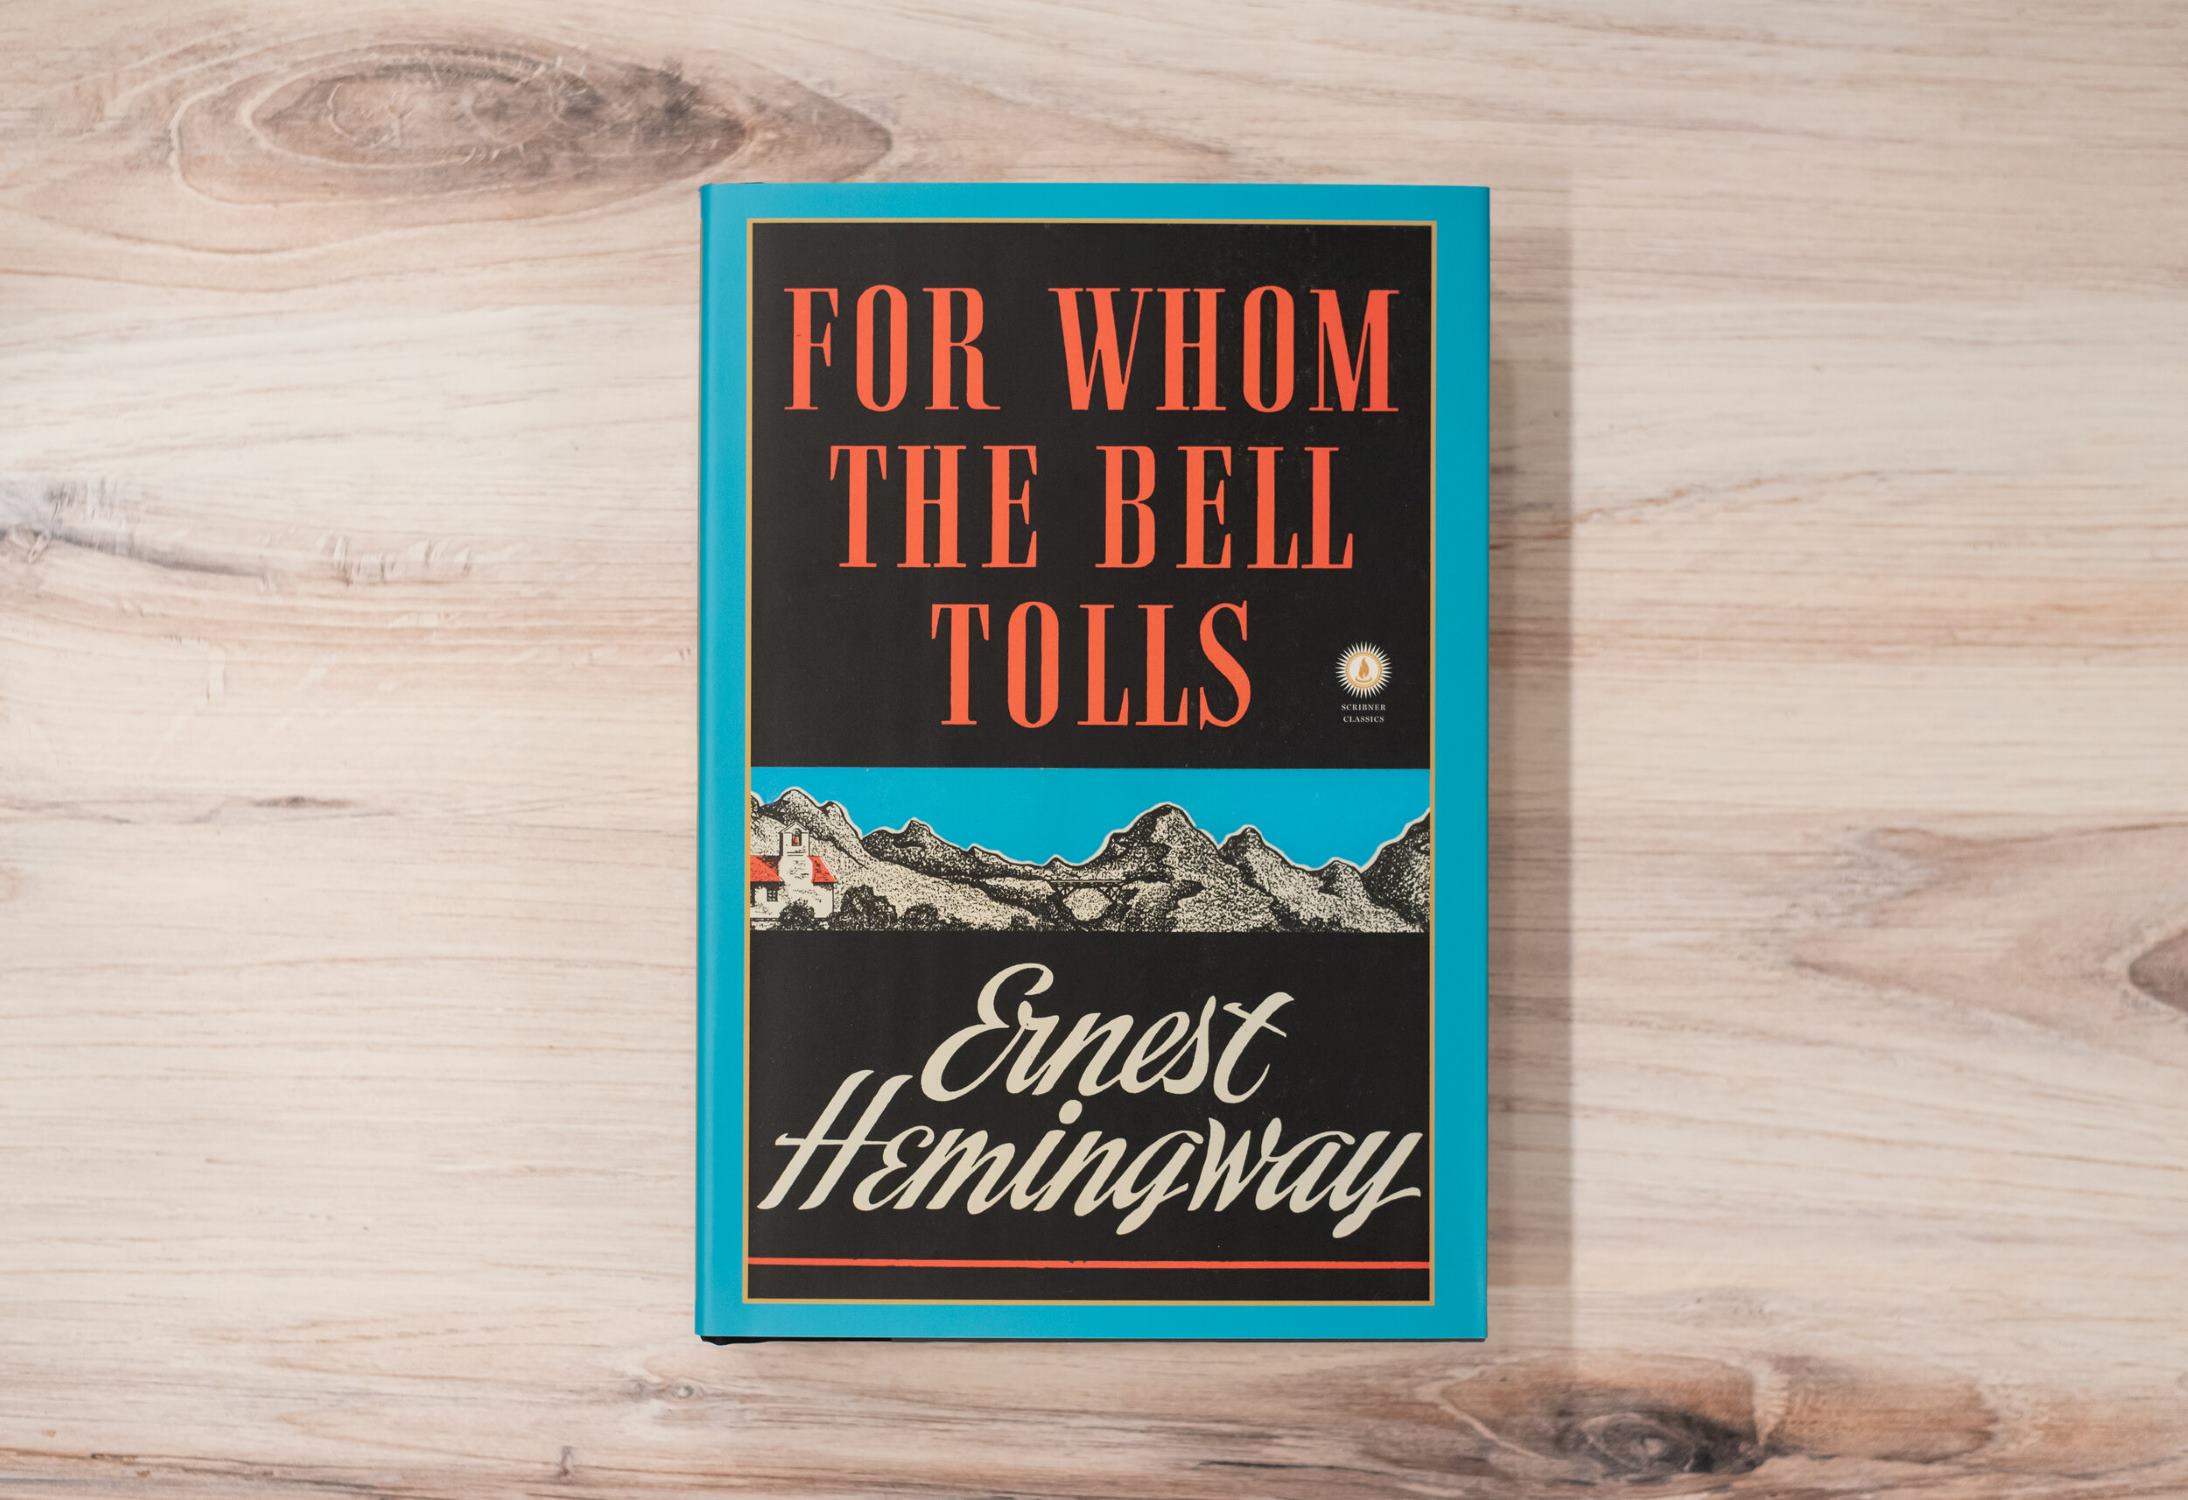 15-astonishing-facts-about-for-whom-the-bell-tolls-ernest-hemingway